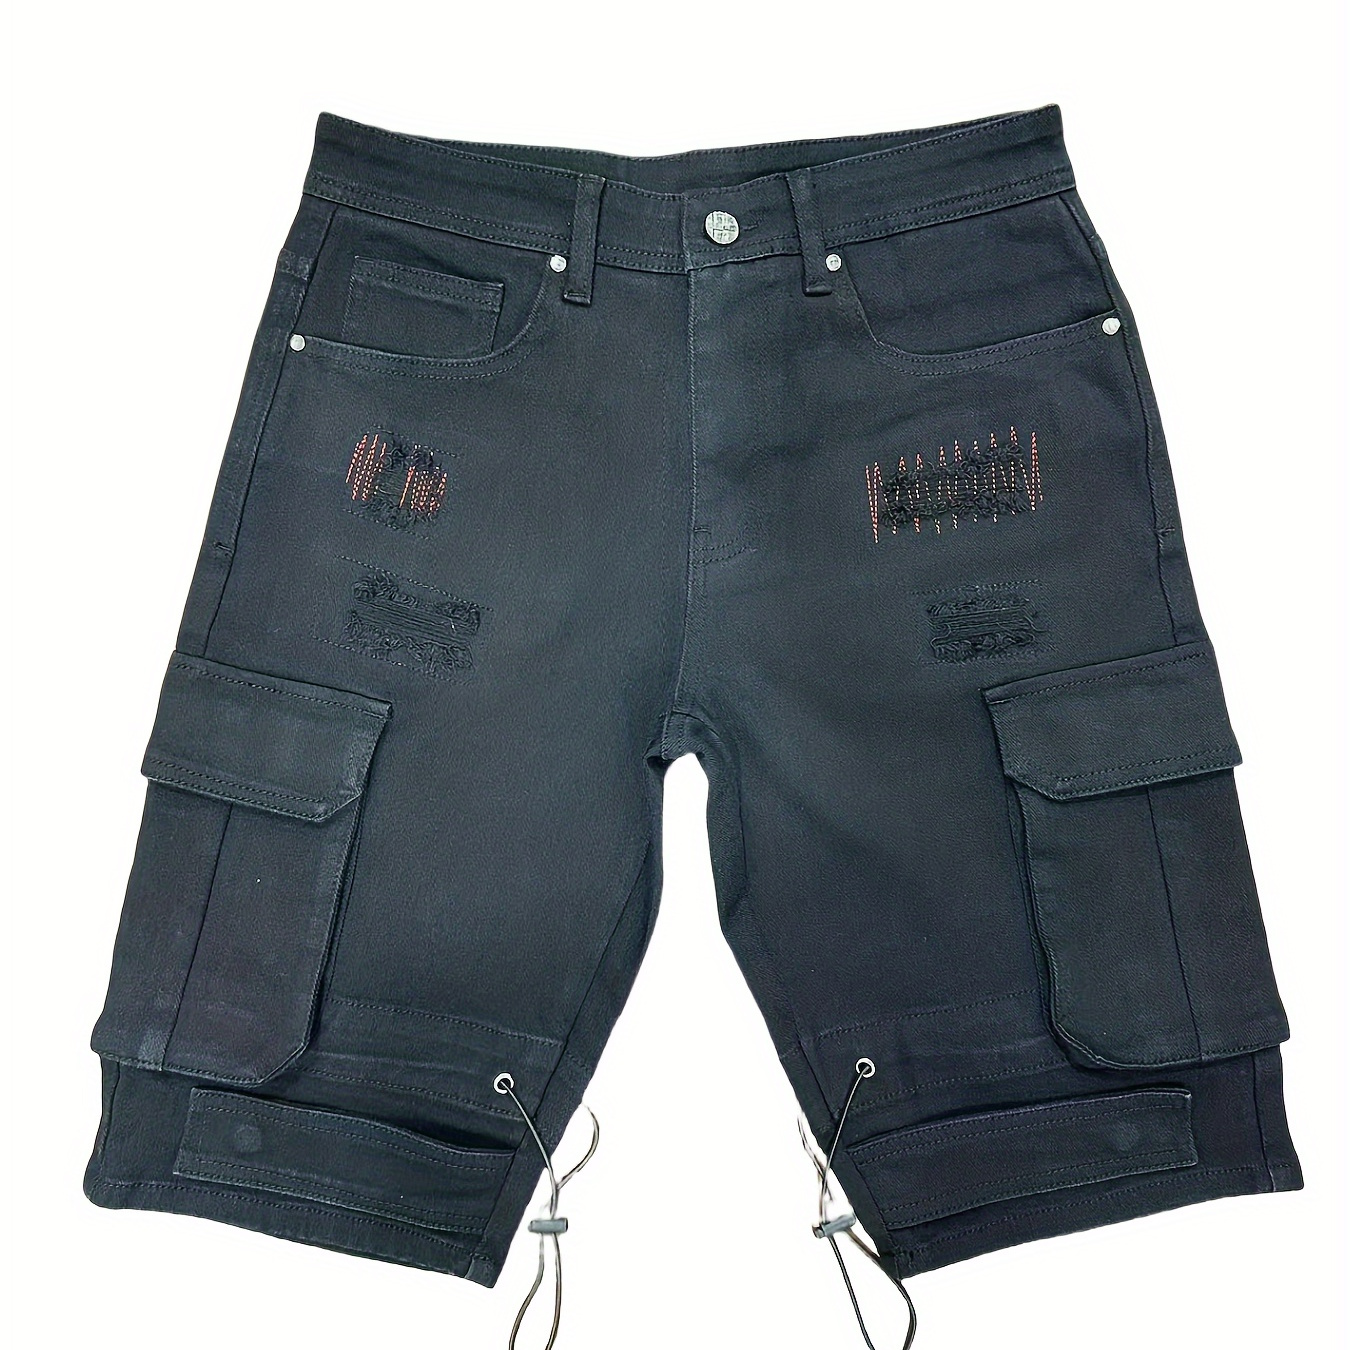 

Men's Casual Cargo Shorts, Multi-pocket Design, Solid Black With Loop Details, Comfort Fit, Zip Fly – R911506-bl-e7